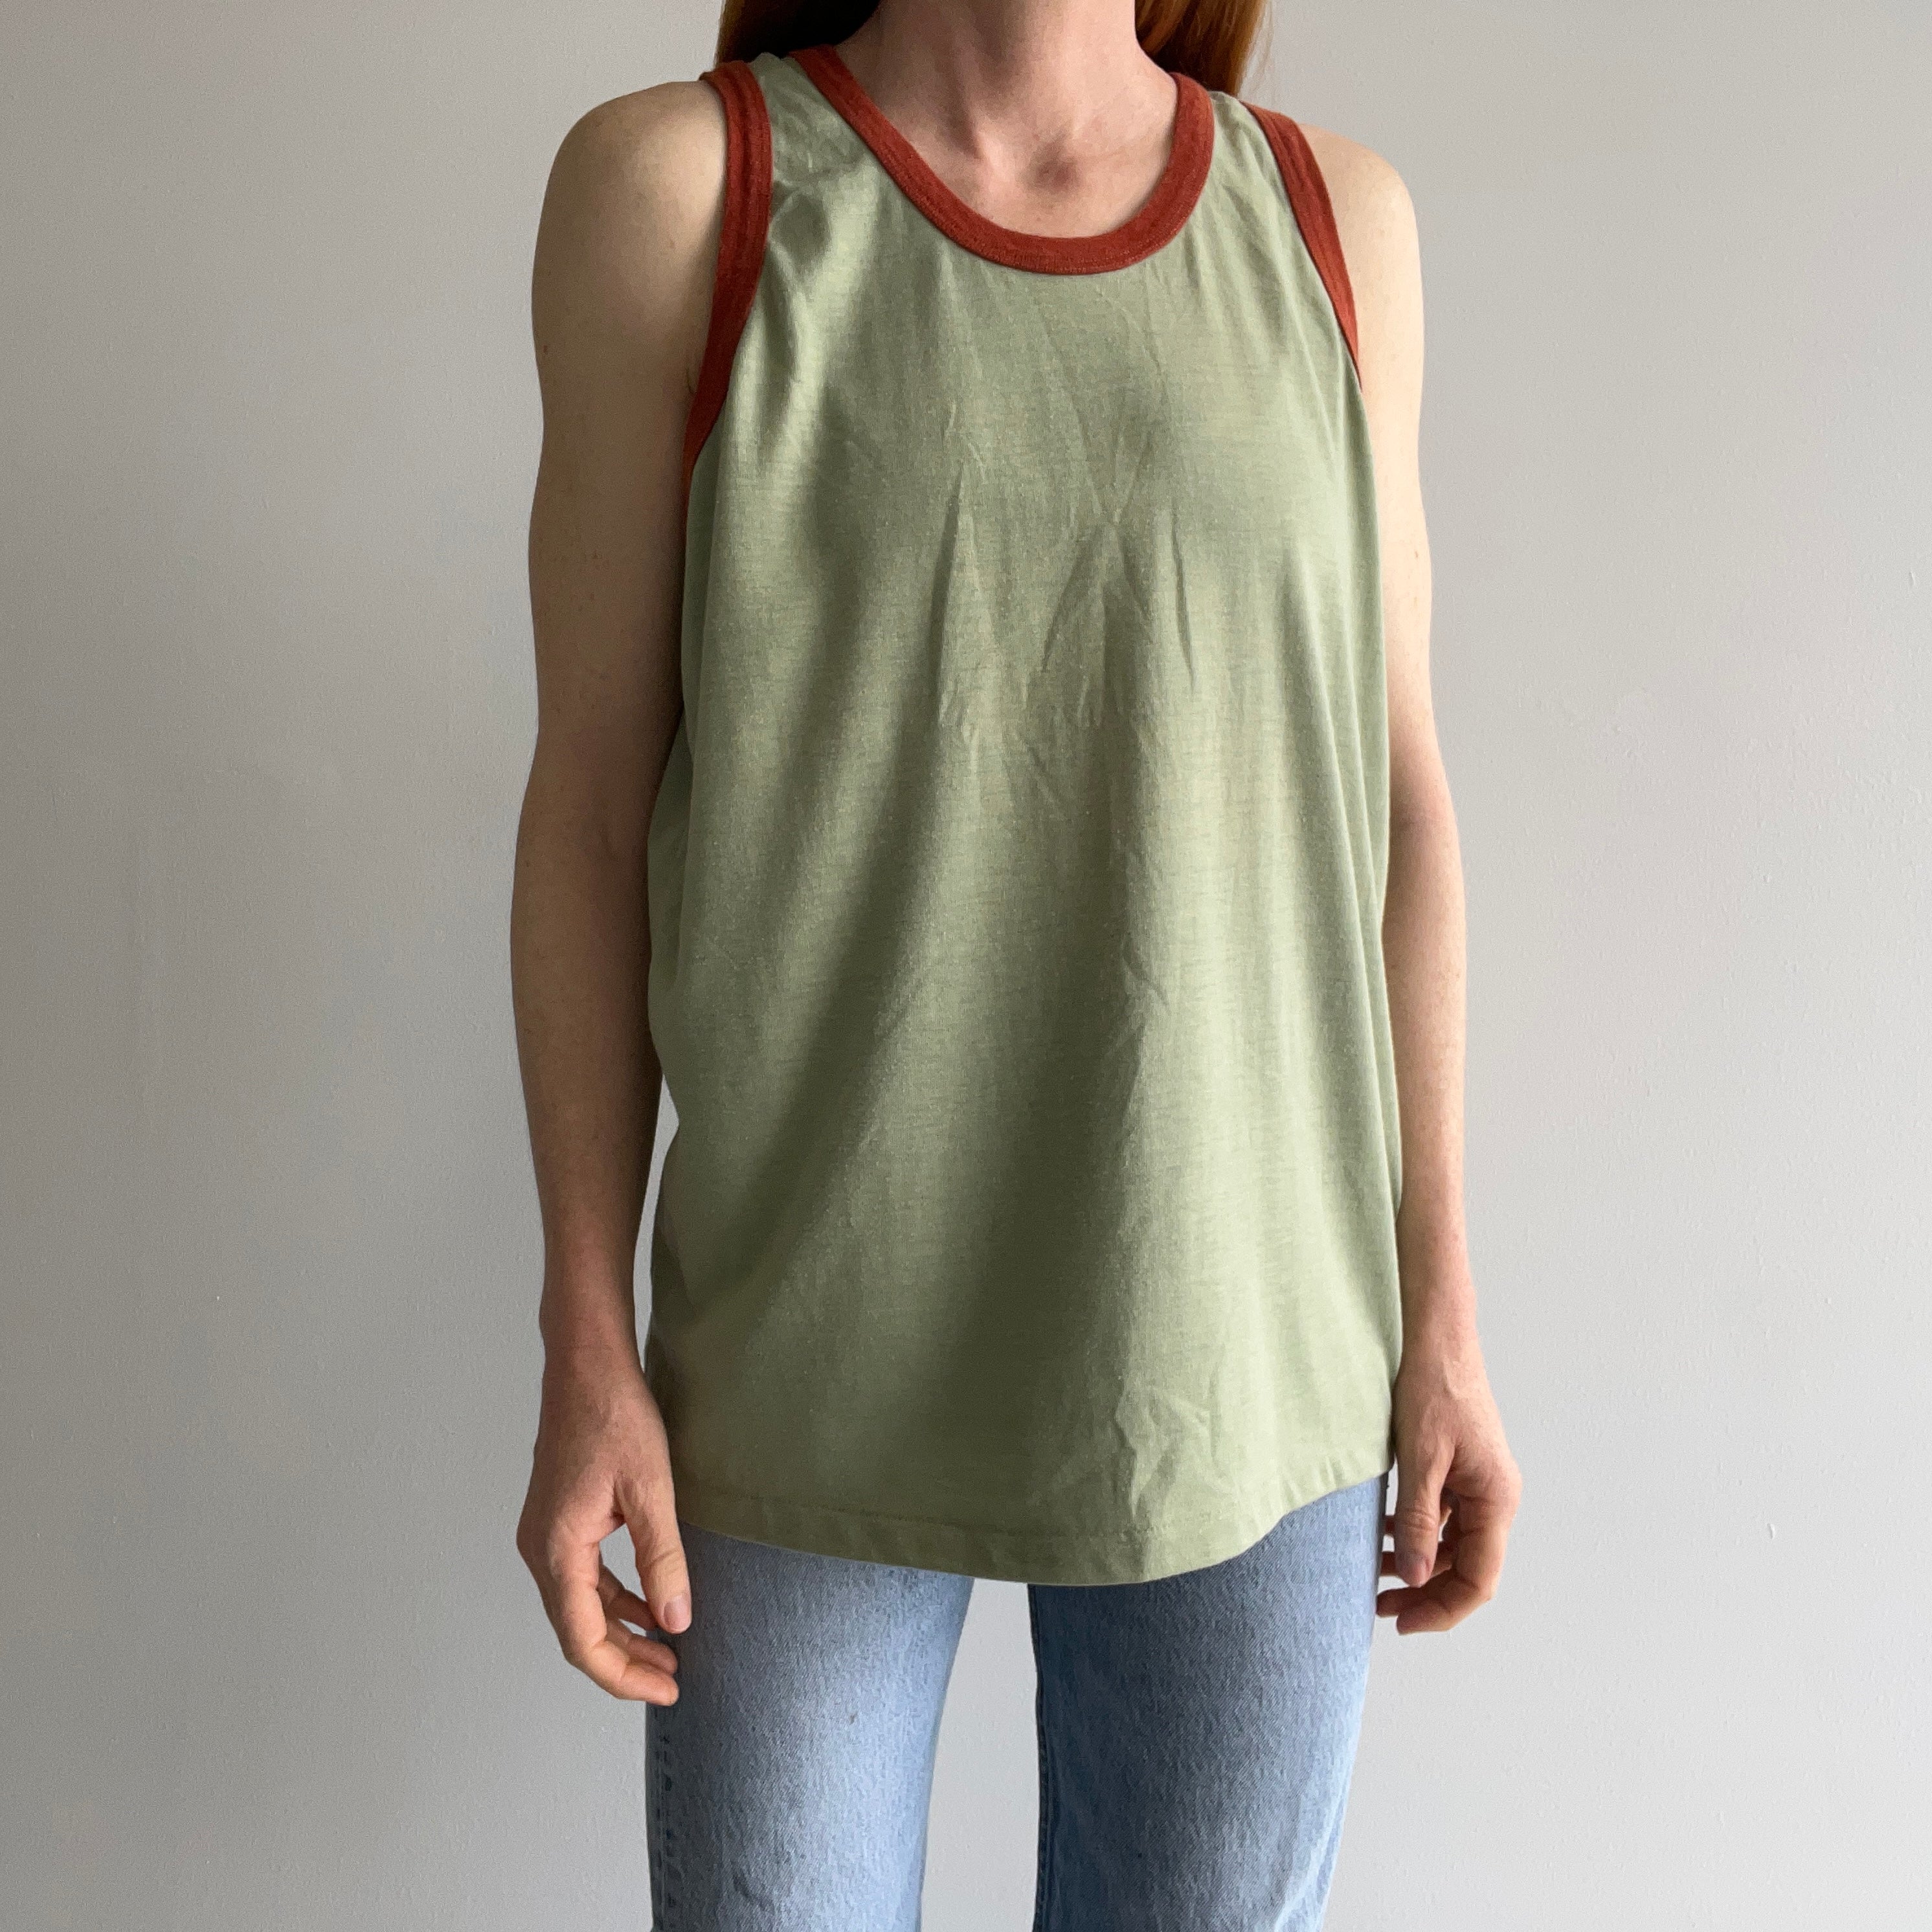 1970s Faded Jade with Rust Trim Tank Top !!!